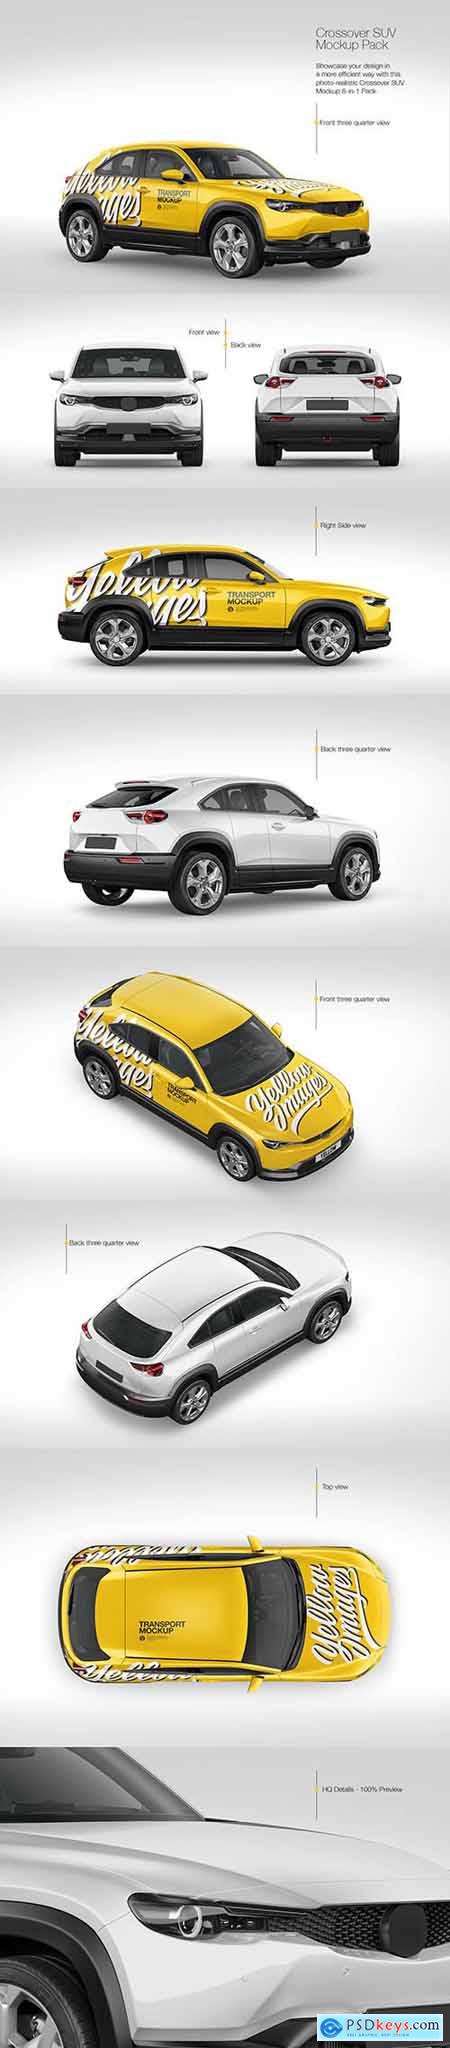 Download Compact Crossover Suv Mockup Pack Free Download Photoshop Vector Stock Image Via Torrent Zippyshare From Psdkeys Com